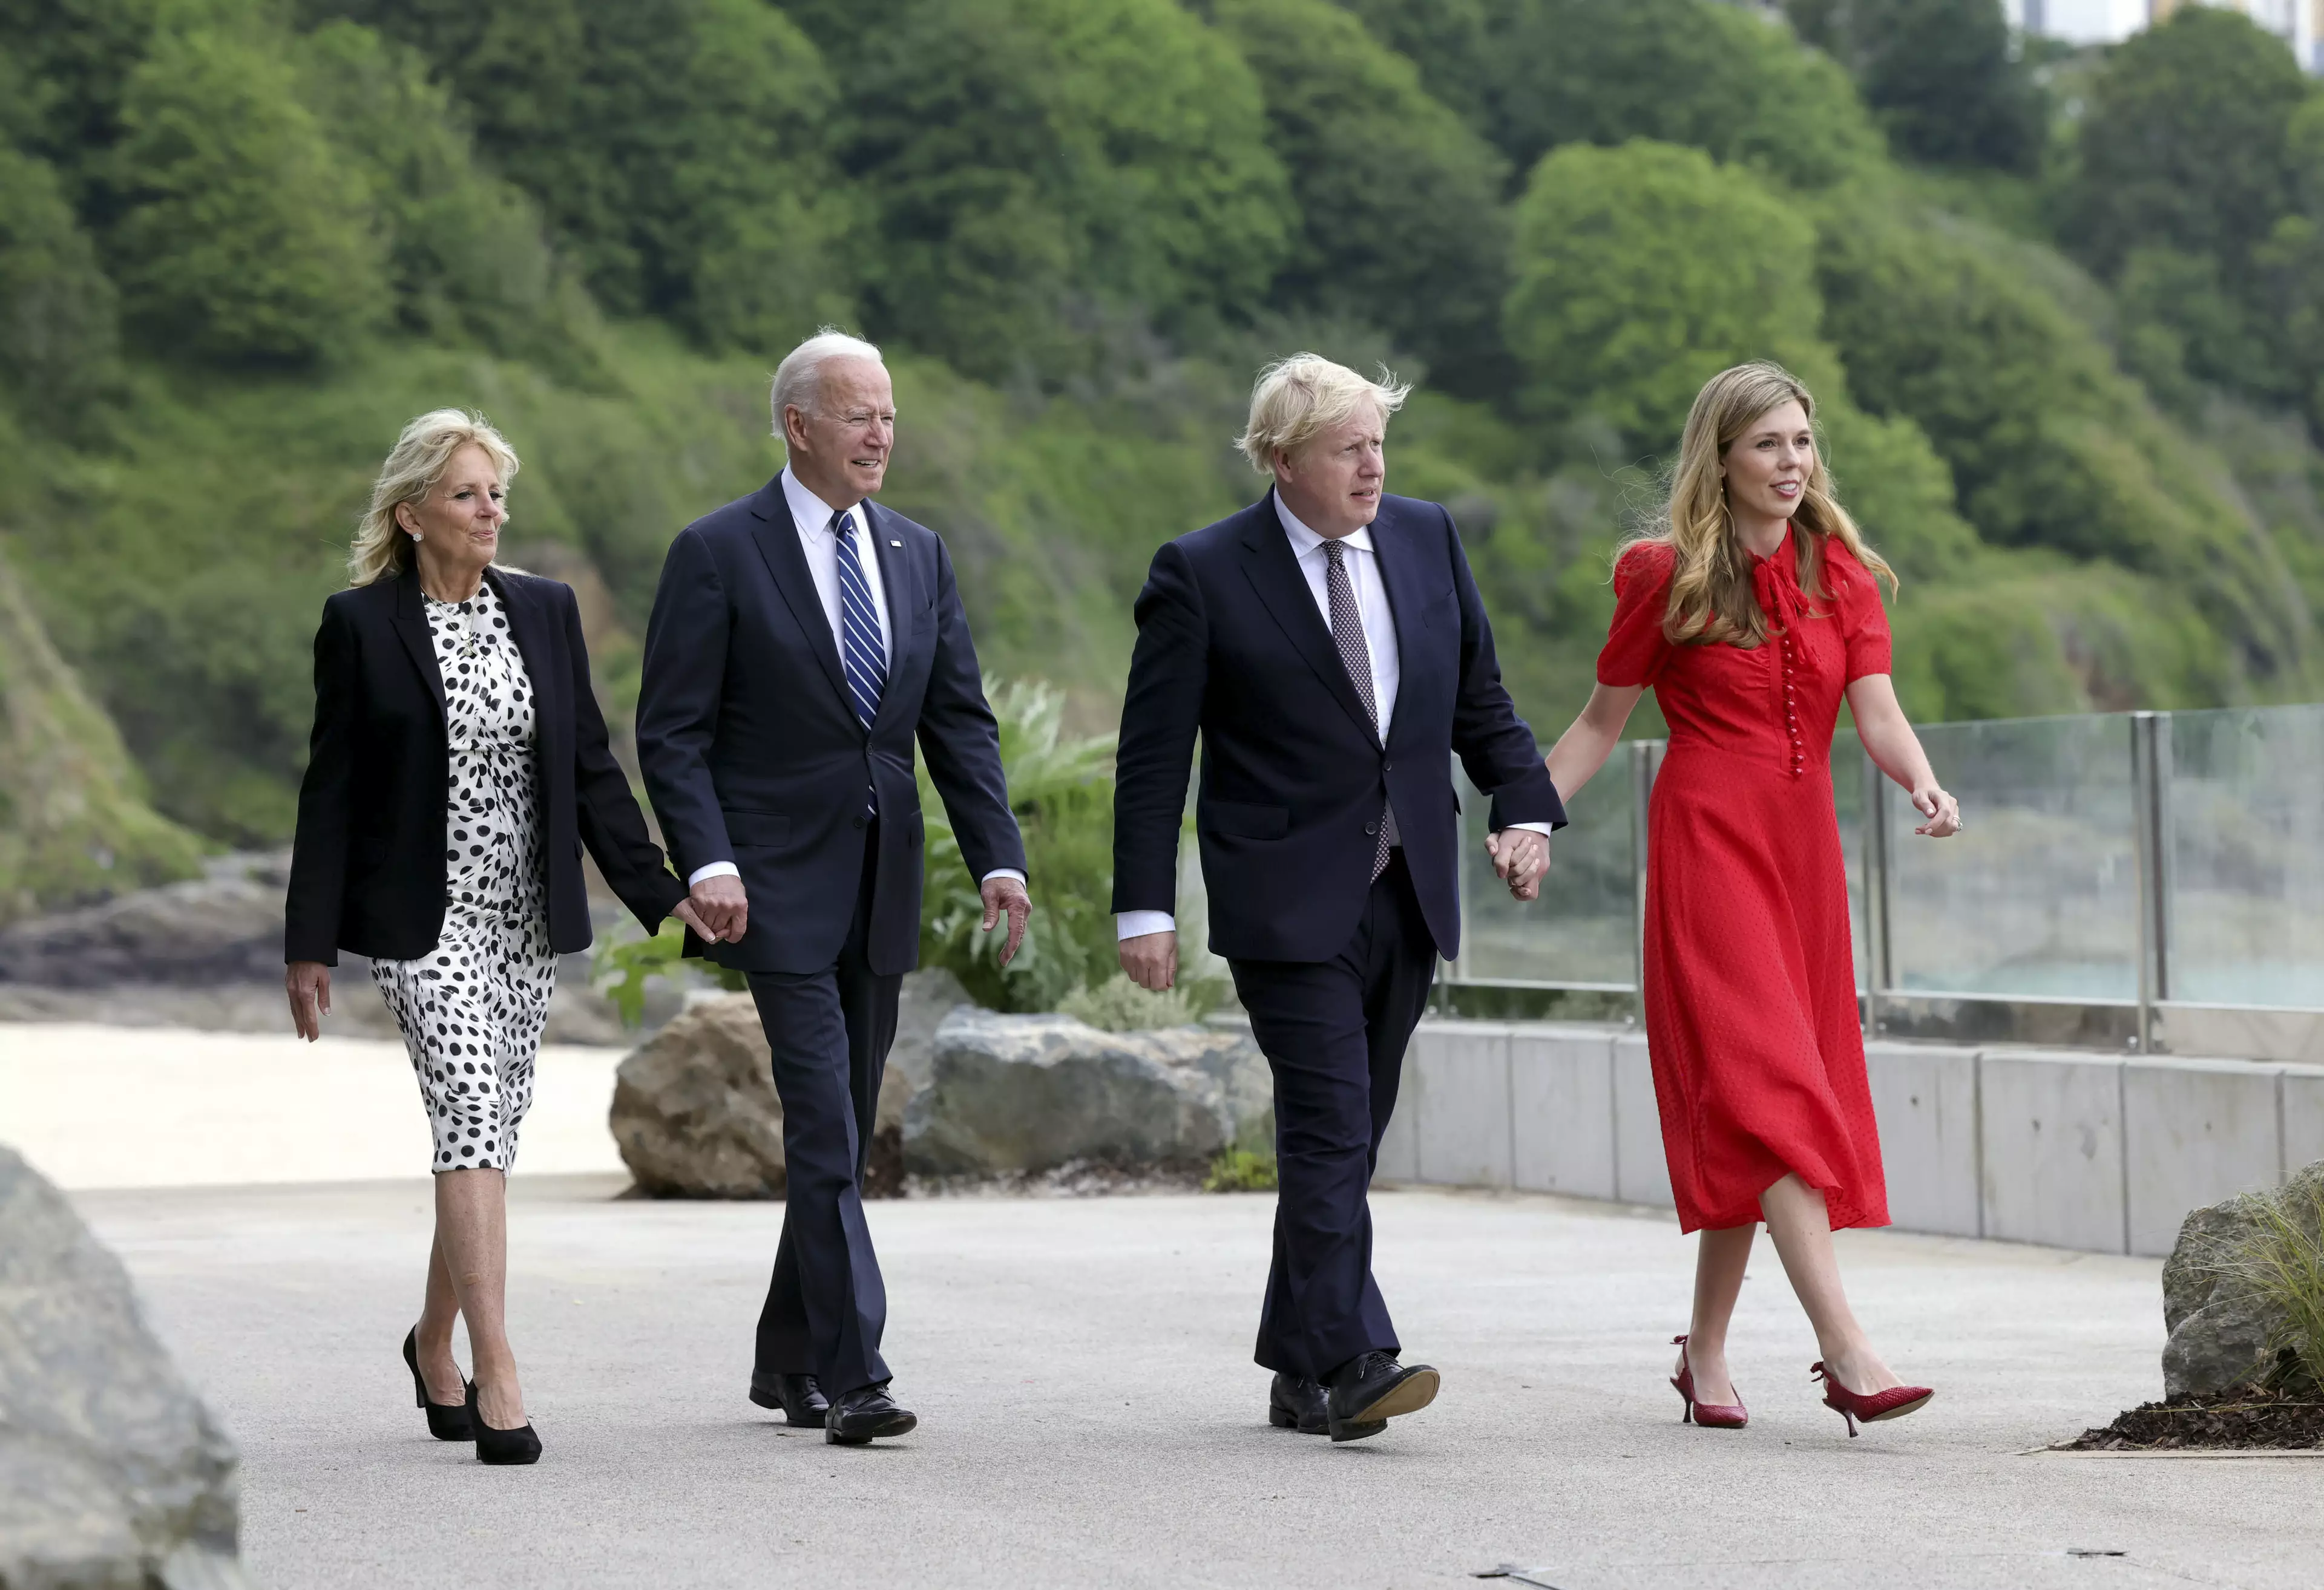 The Prime Minister and the President were both pictured with their wives (